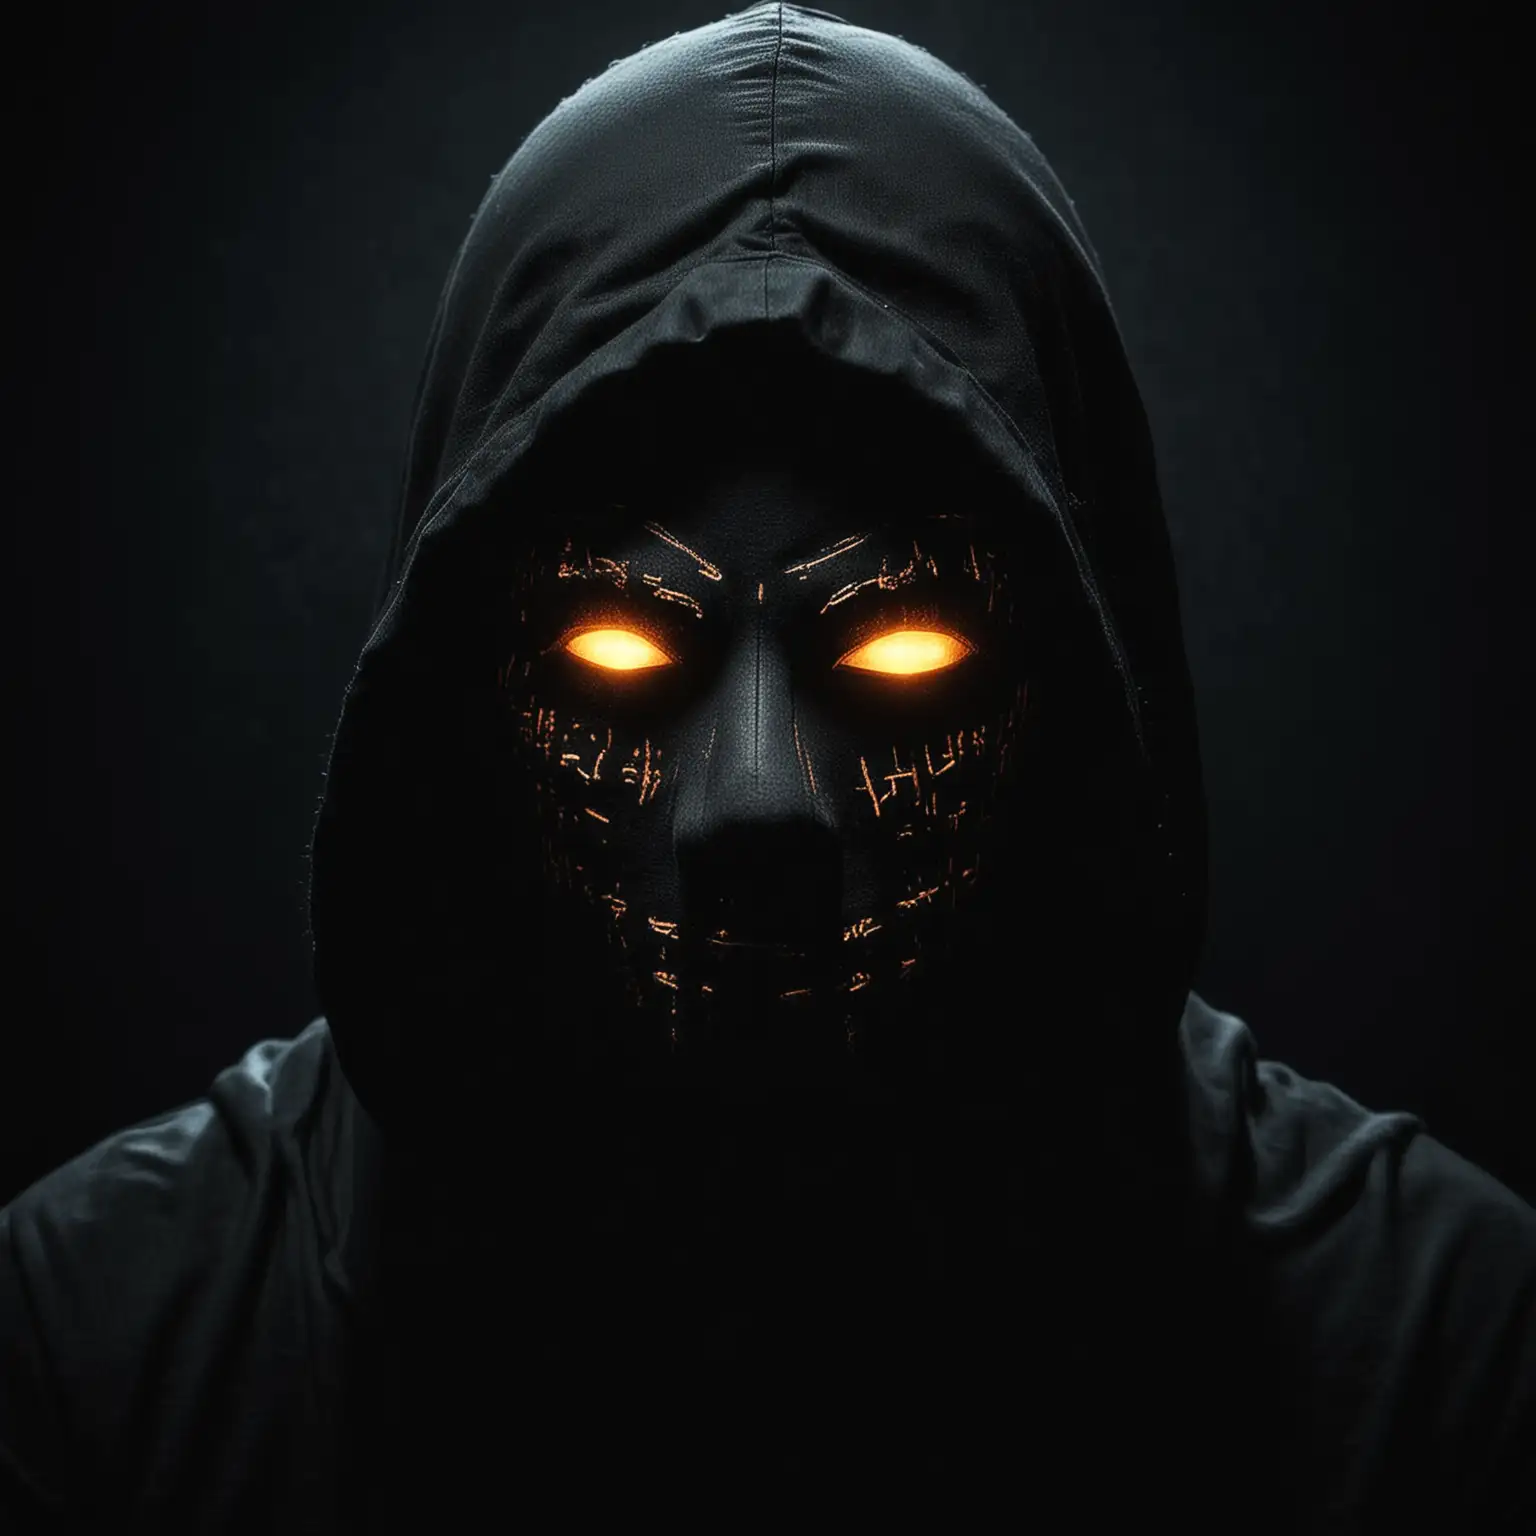 Hooded Figure with Glowing Eyes in Enigmatic Darkness